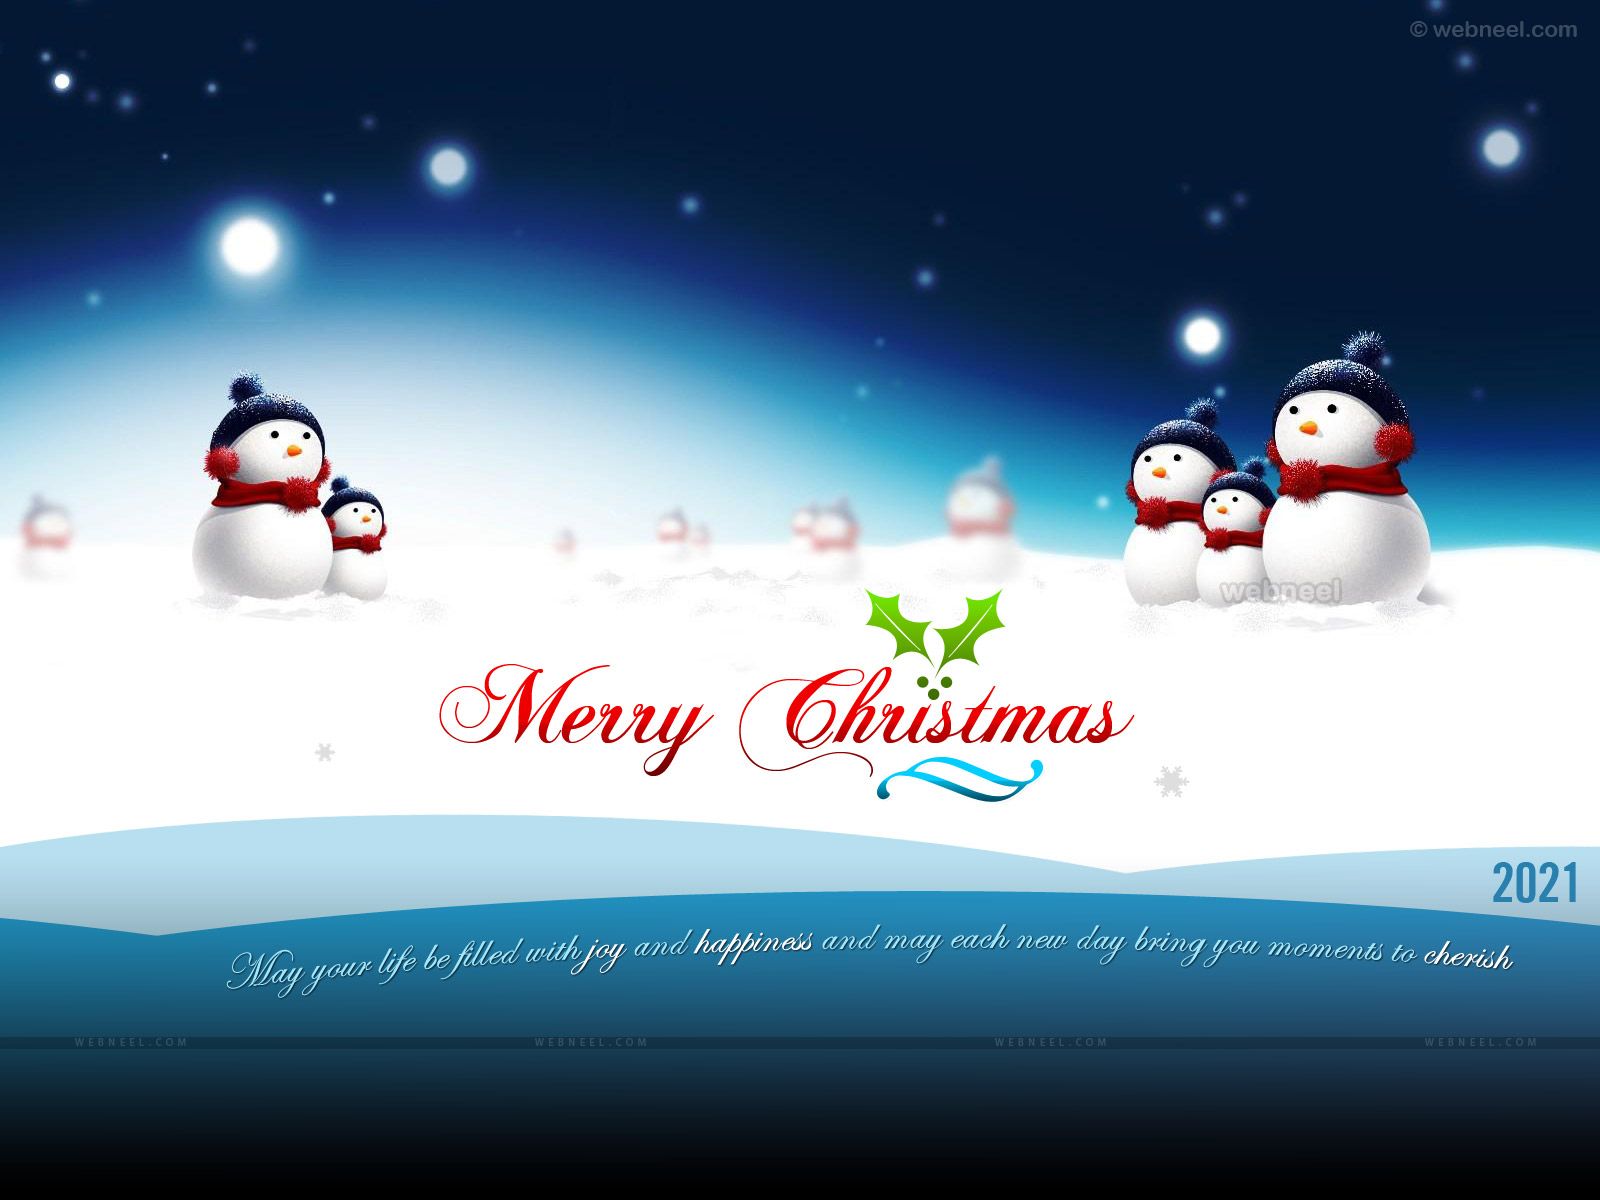 Merry Christmas Wallpaper and Background for your desktop